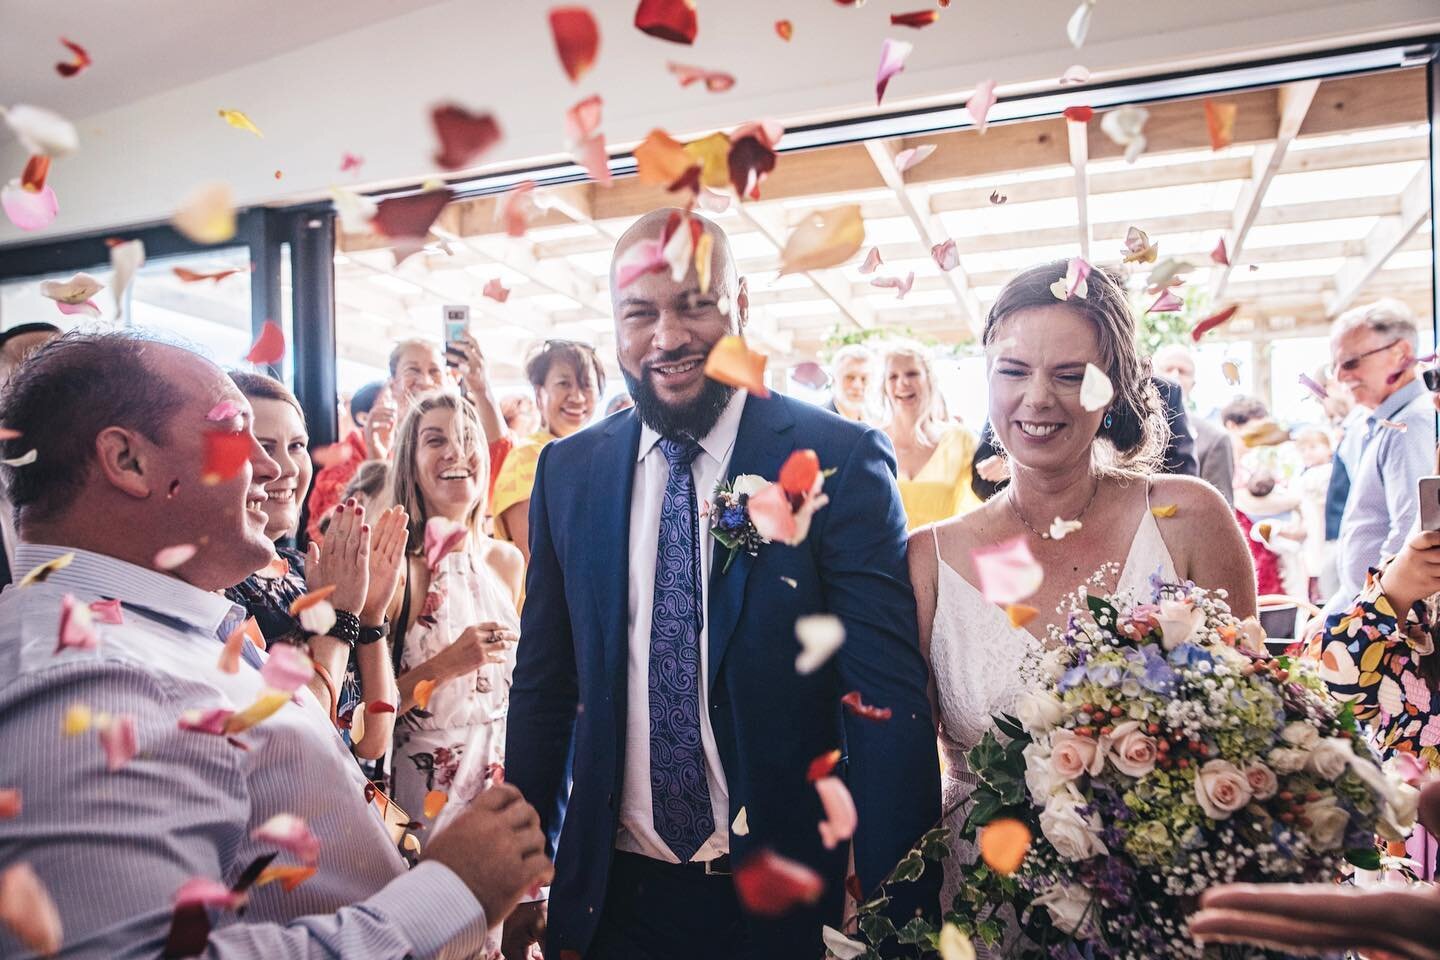 First wedding of the year for me and what a beauty ❤️ Renee &amp; Dan such a special day 🥂 @renee.hart.92 
.
.
.
.
.
#Justmarried #mrandmrs #confettiexit #confetti #aucklandweddingphotographer #melsceremonies #aucklandweddings #rosepetalconfetti #ro